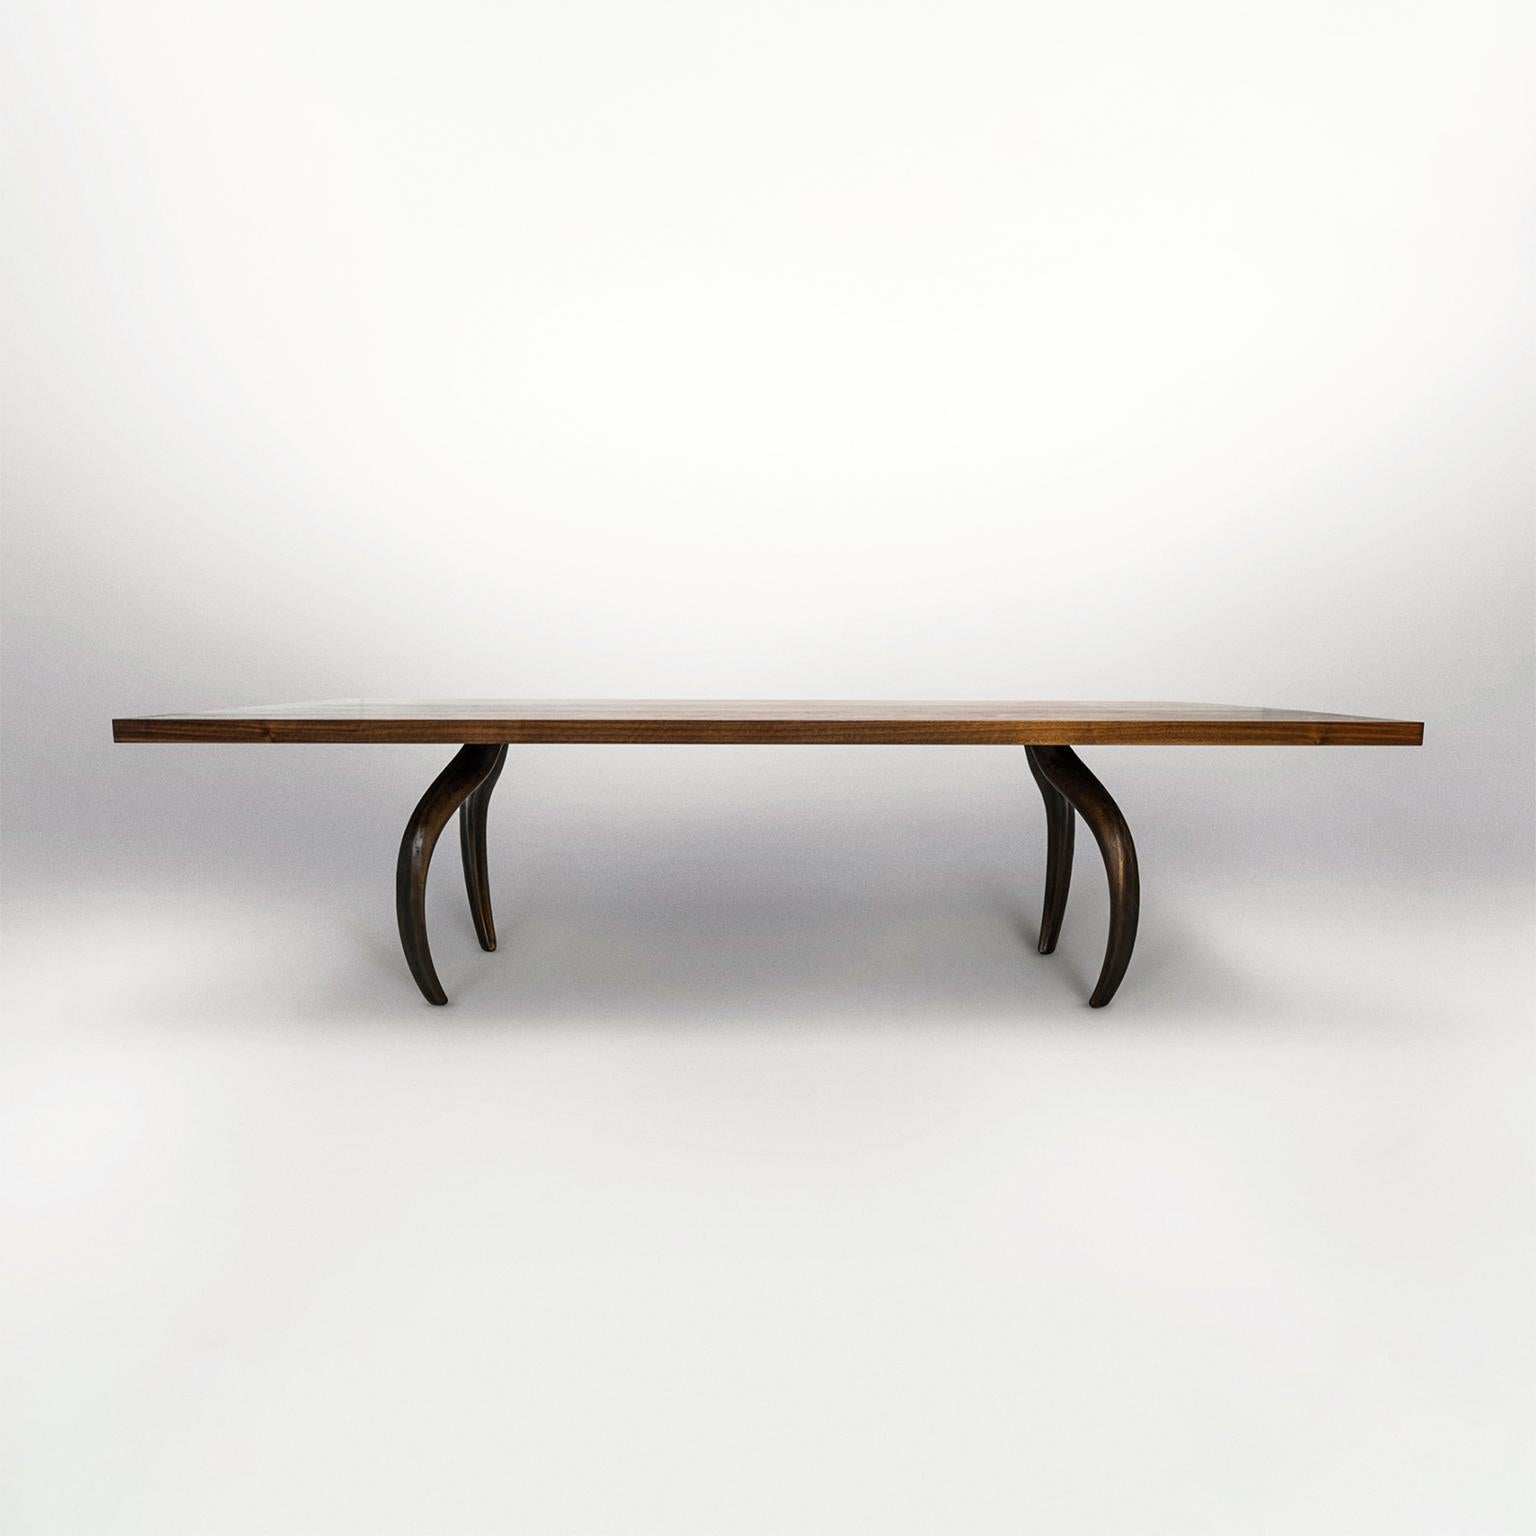 Lacquered Stacklab Wishbone - 10 Seats, Dining Table, Joined Hardwood and Cast-Metal For Sale